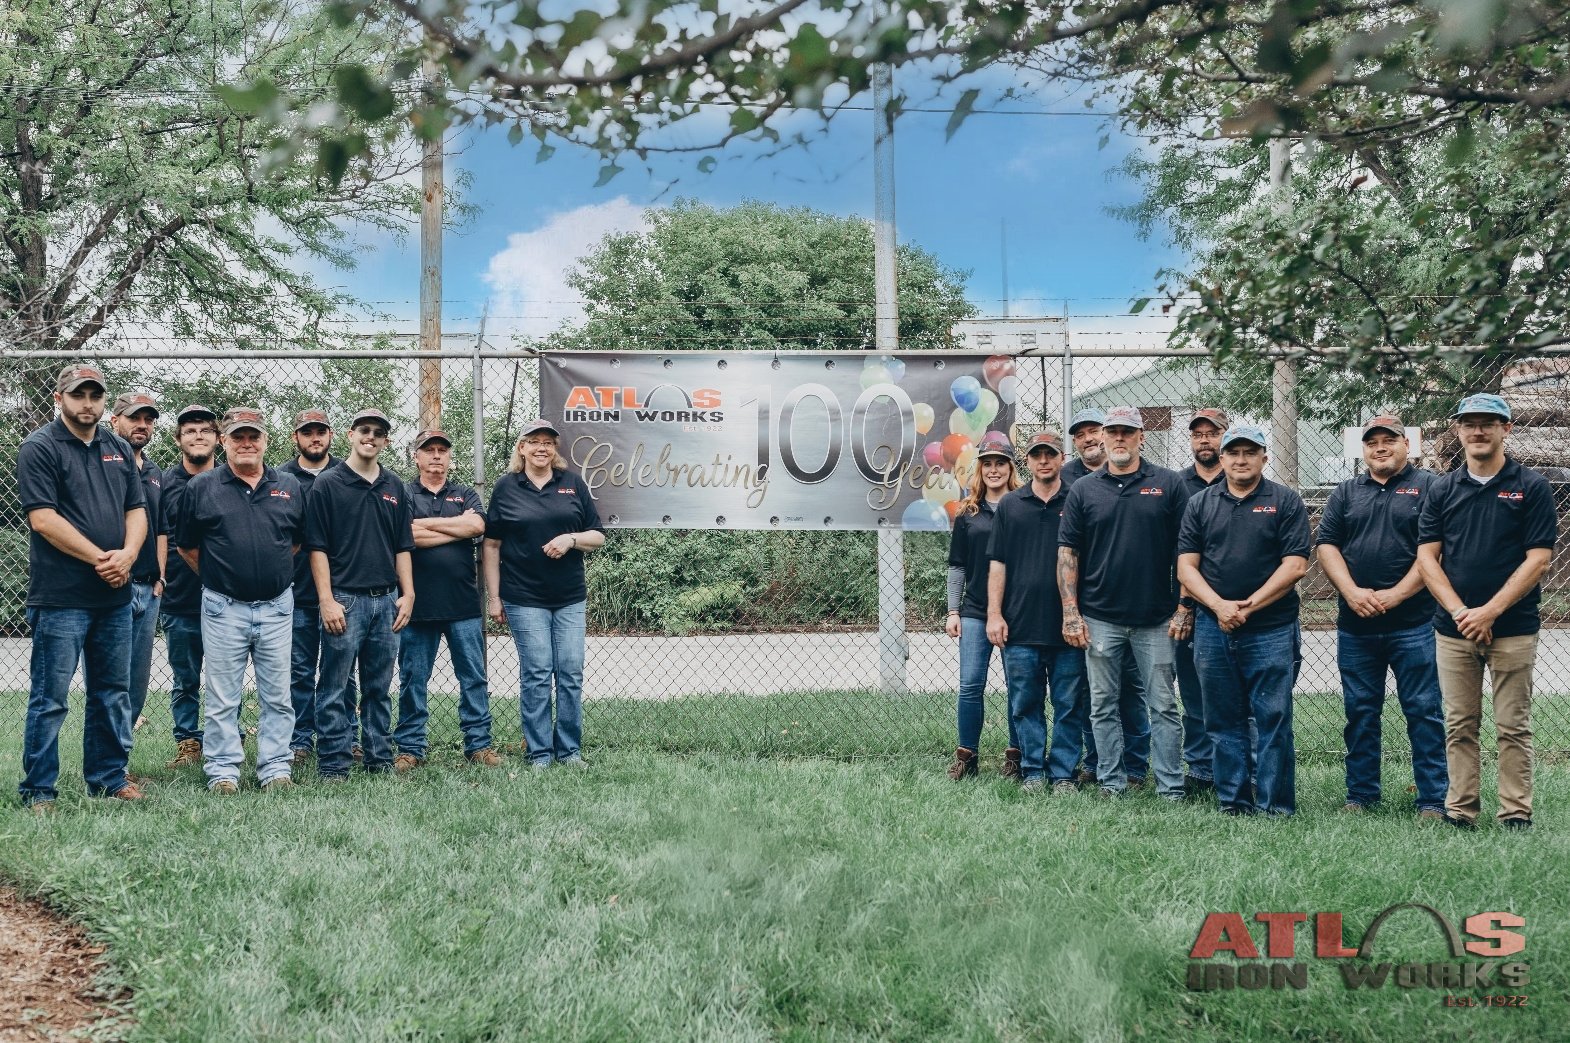 <strong>Atlas Iron Works celebrates 100th Anniversary! </strong>